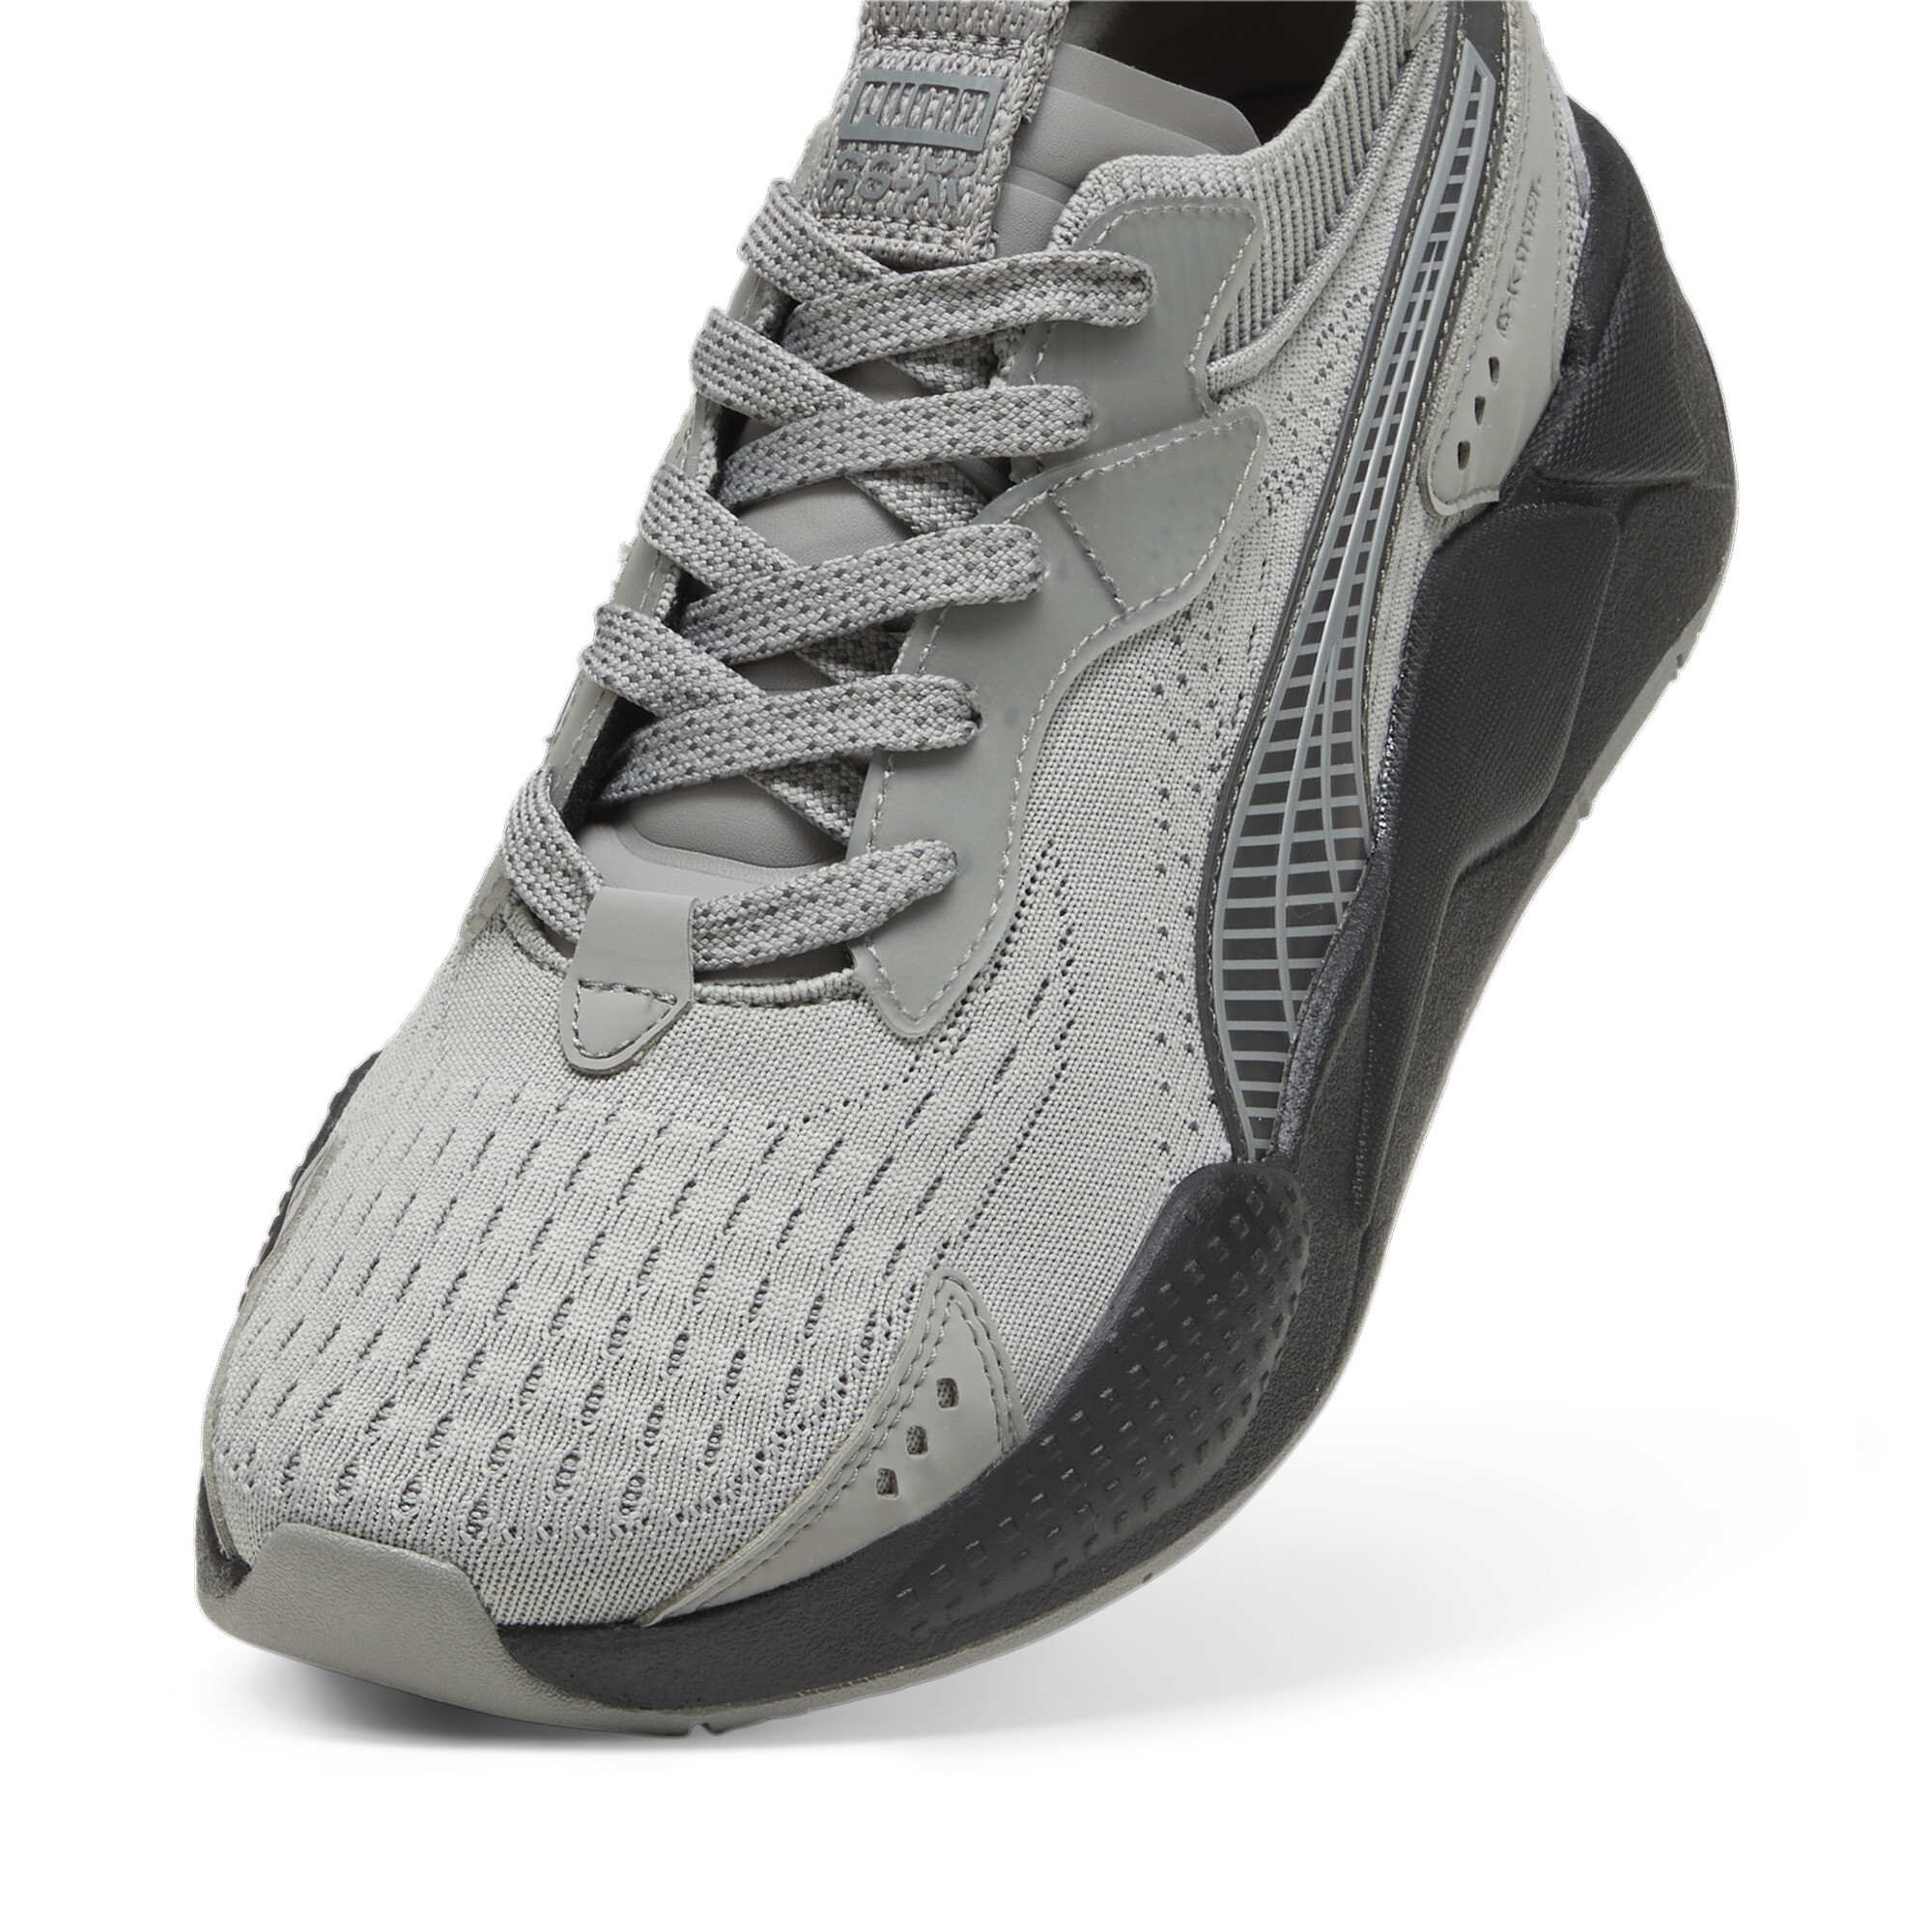 Puma RS-XK REMIX Sneakers, Gray, Size 37.5, Shoes